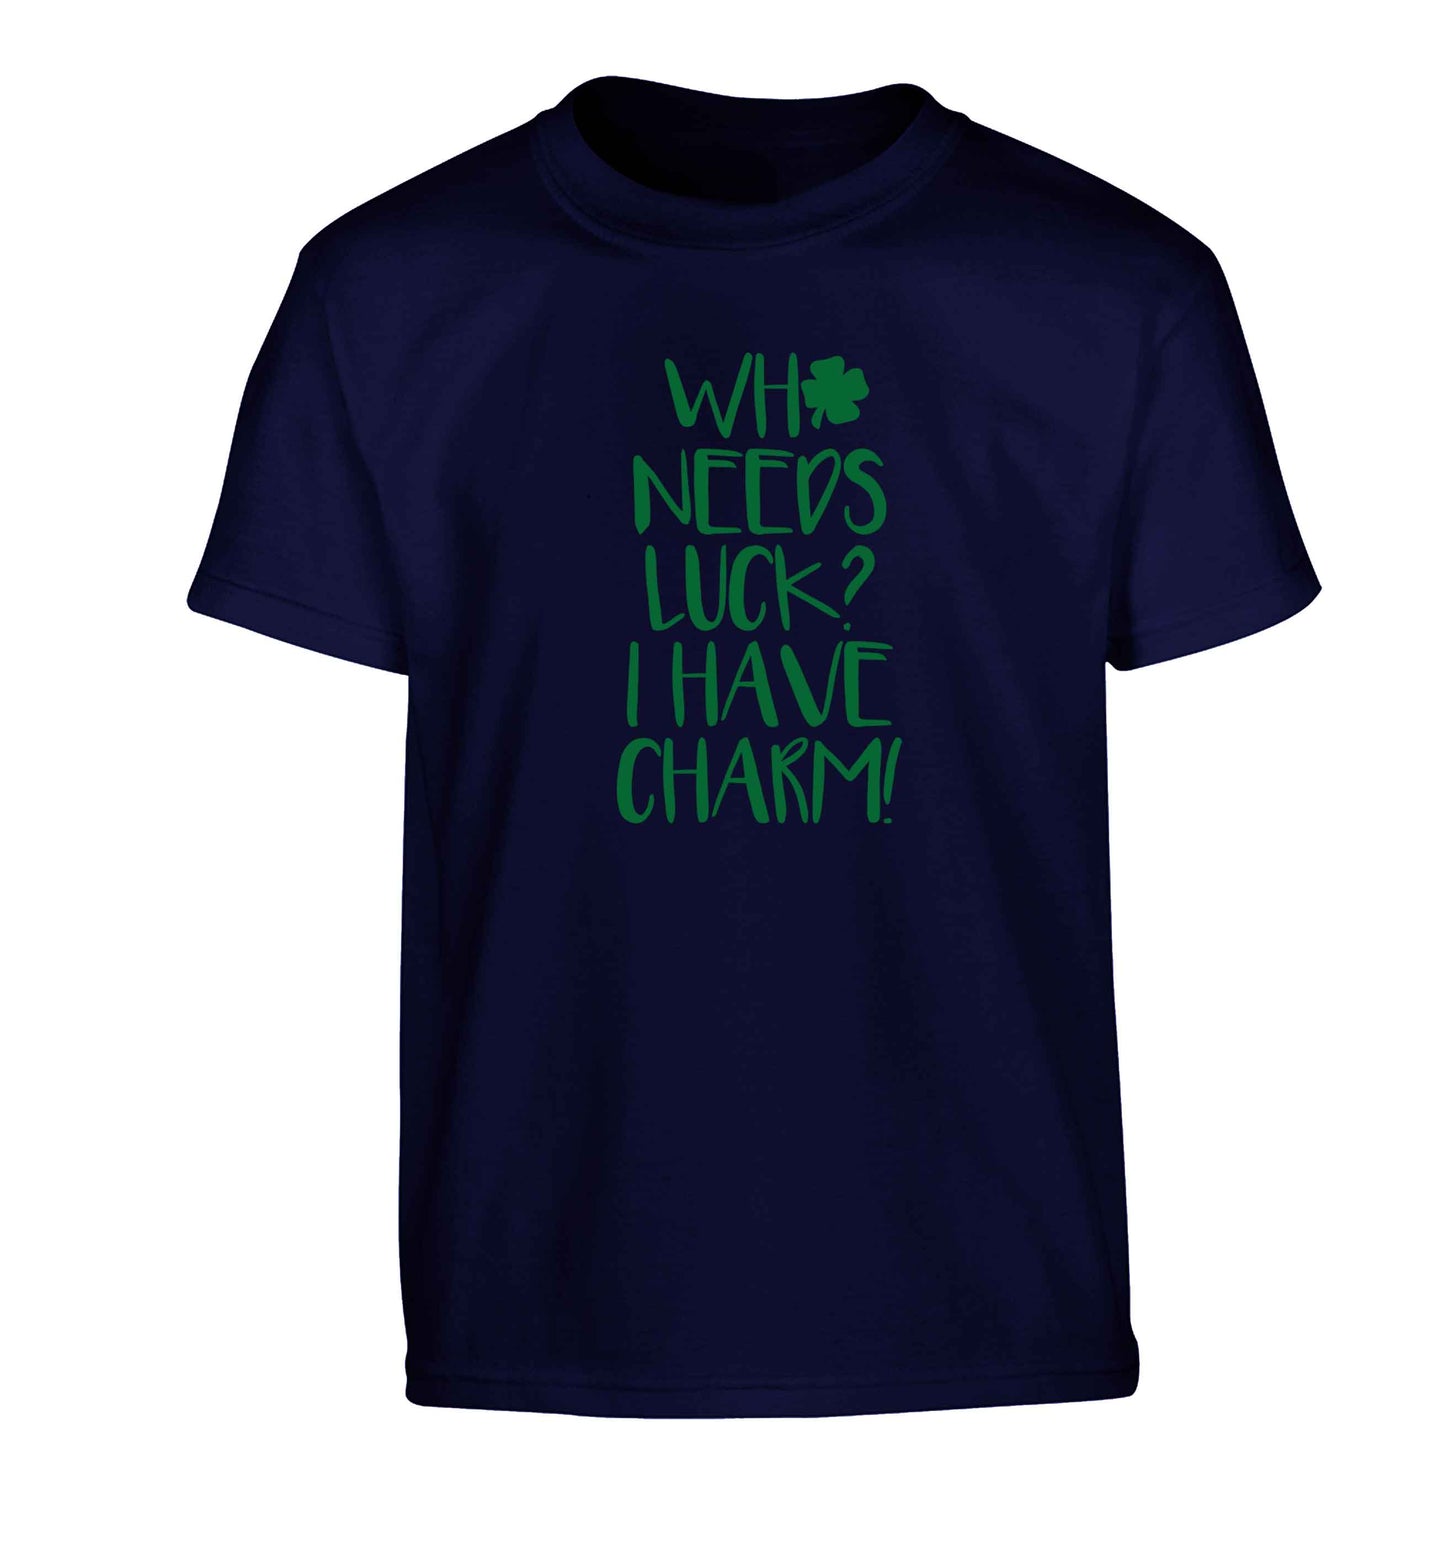 Who needs luck? I have charm! Children's navy Tshirt 12-13 Years